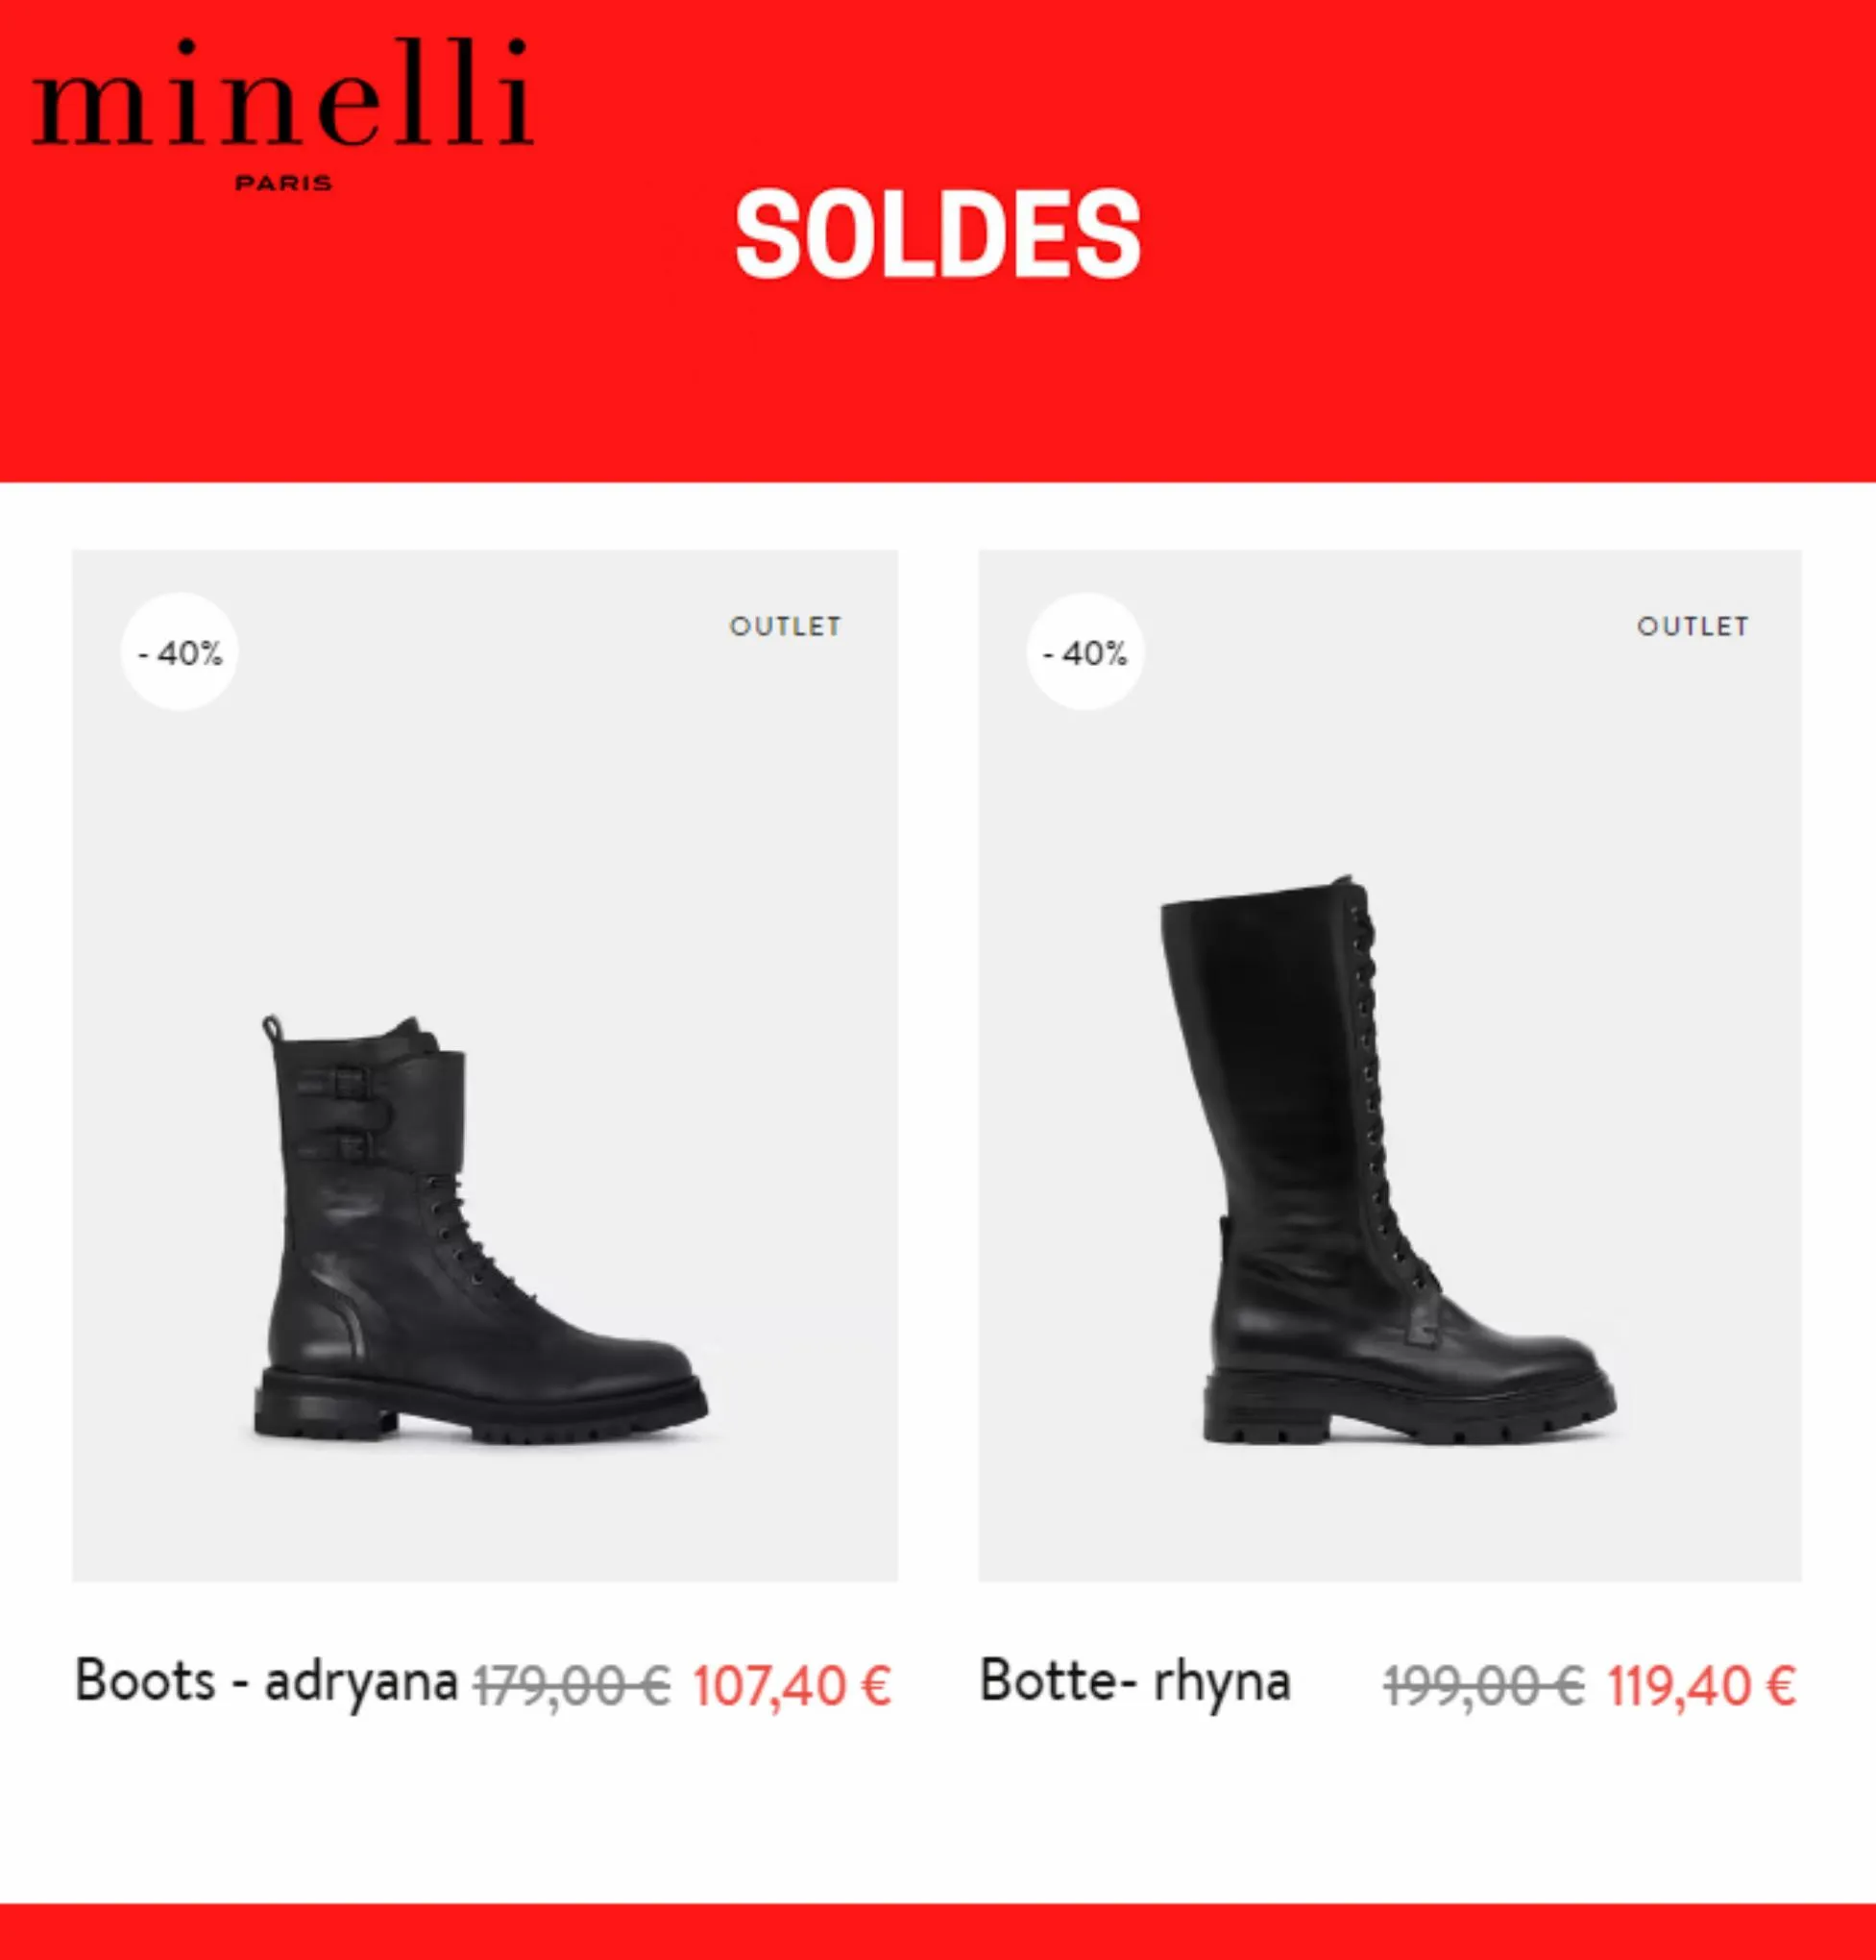 Catalogue Outlet Minelli, page 00001